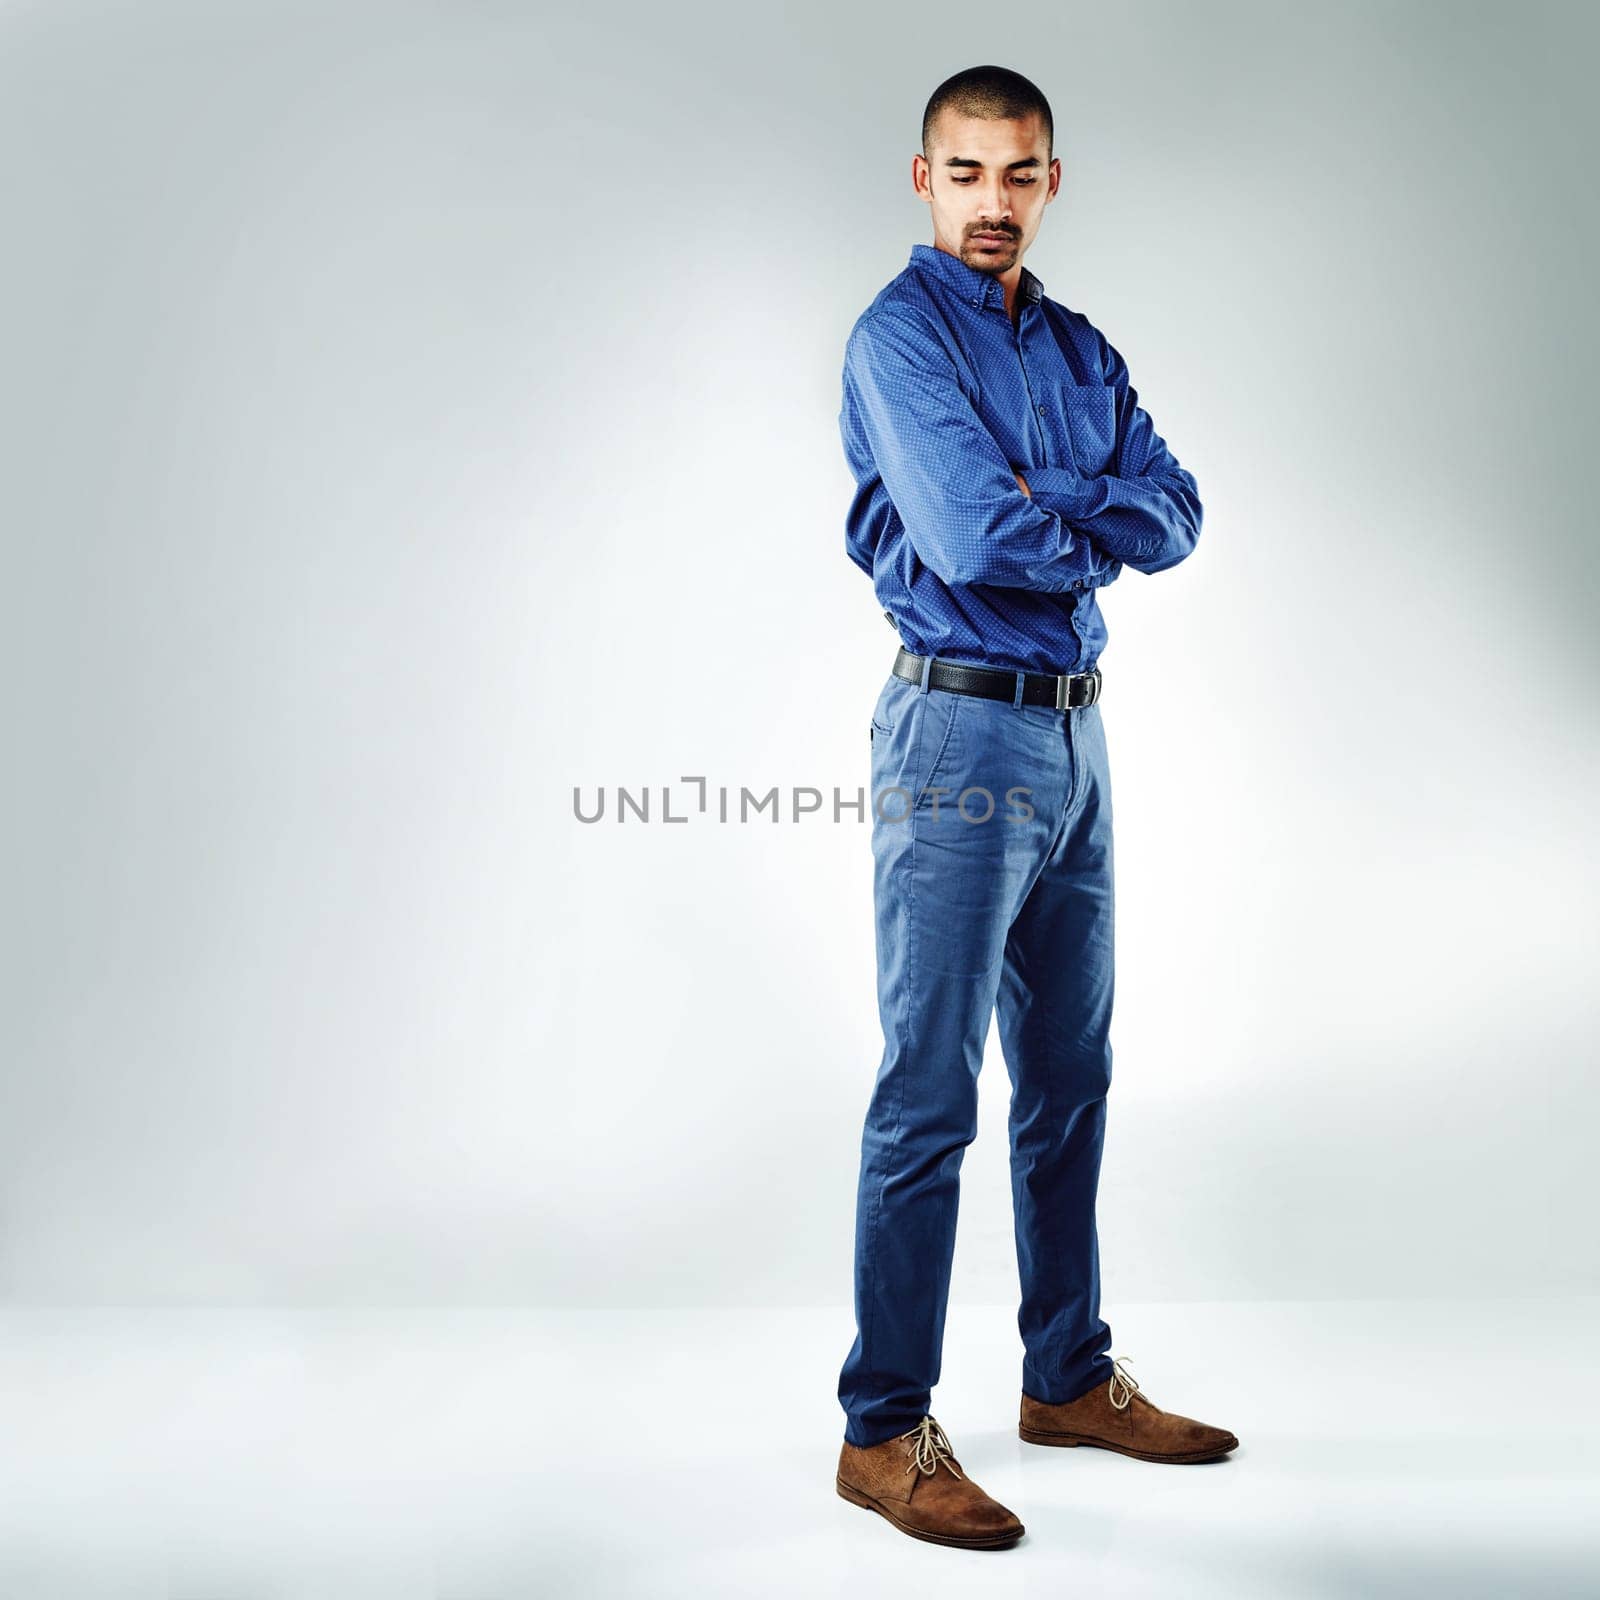 Do you have what it takes to get through hard times. a young businessman posing against a grey background